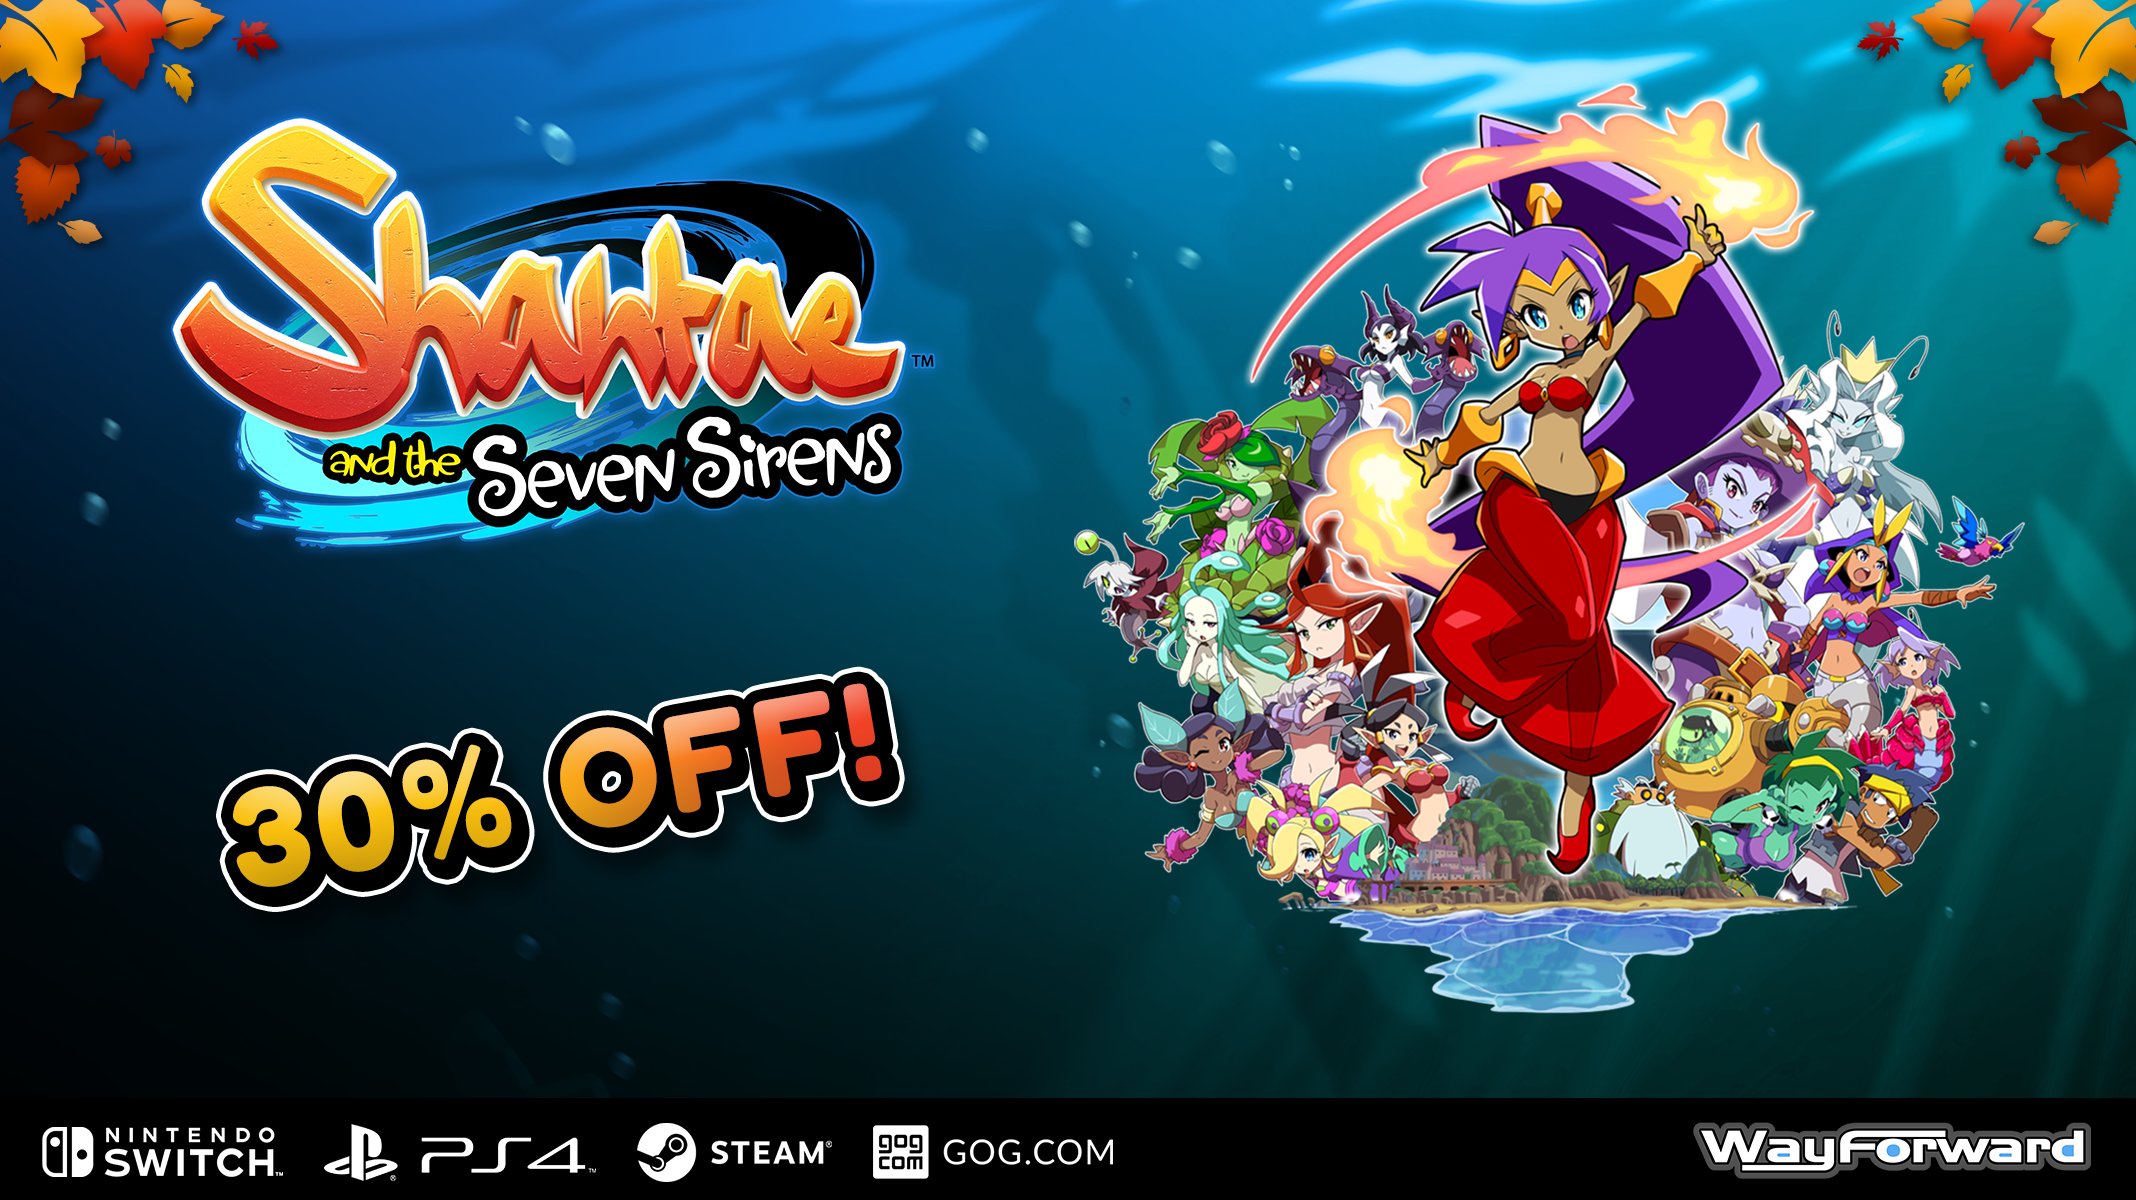 WayForward on Twitter: "Save on Shantae and Seven Sirens on Switch, PS4, Steam, and GOG! Uncover the mysteries the waves in Shantae's latest largest adventure! Switch: https://t.co/pZGlfPmD7M PS4: